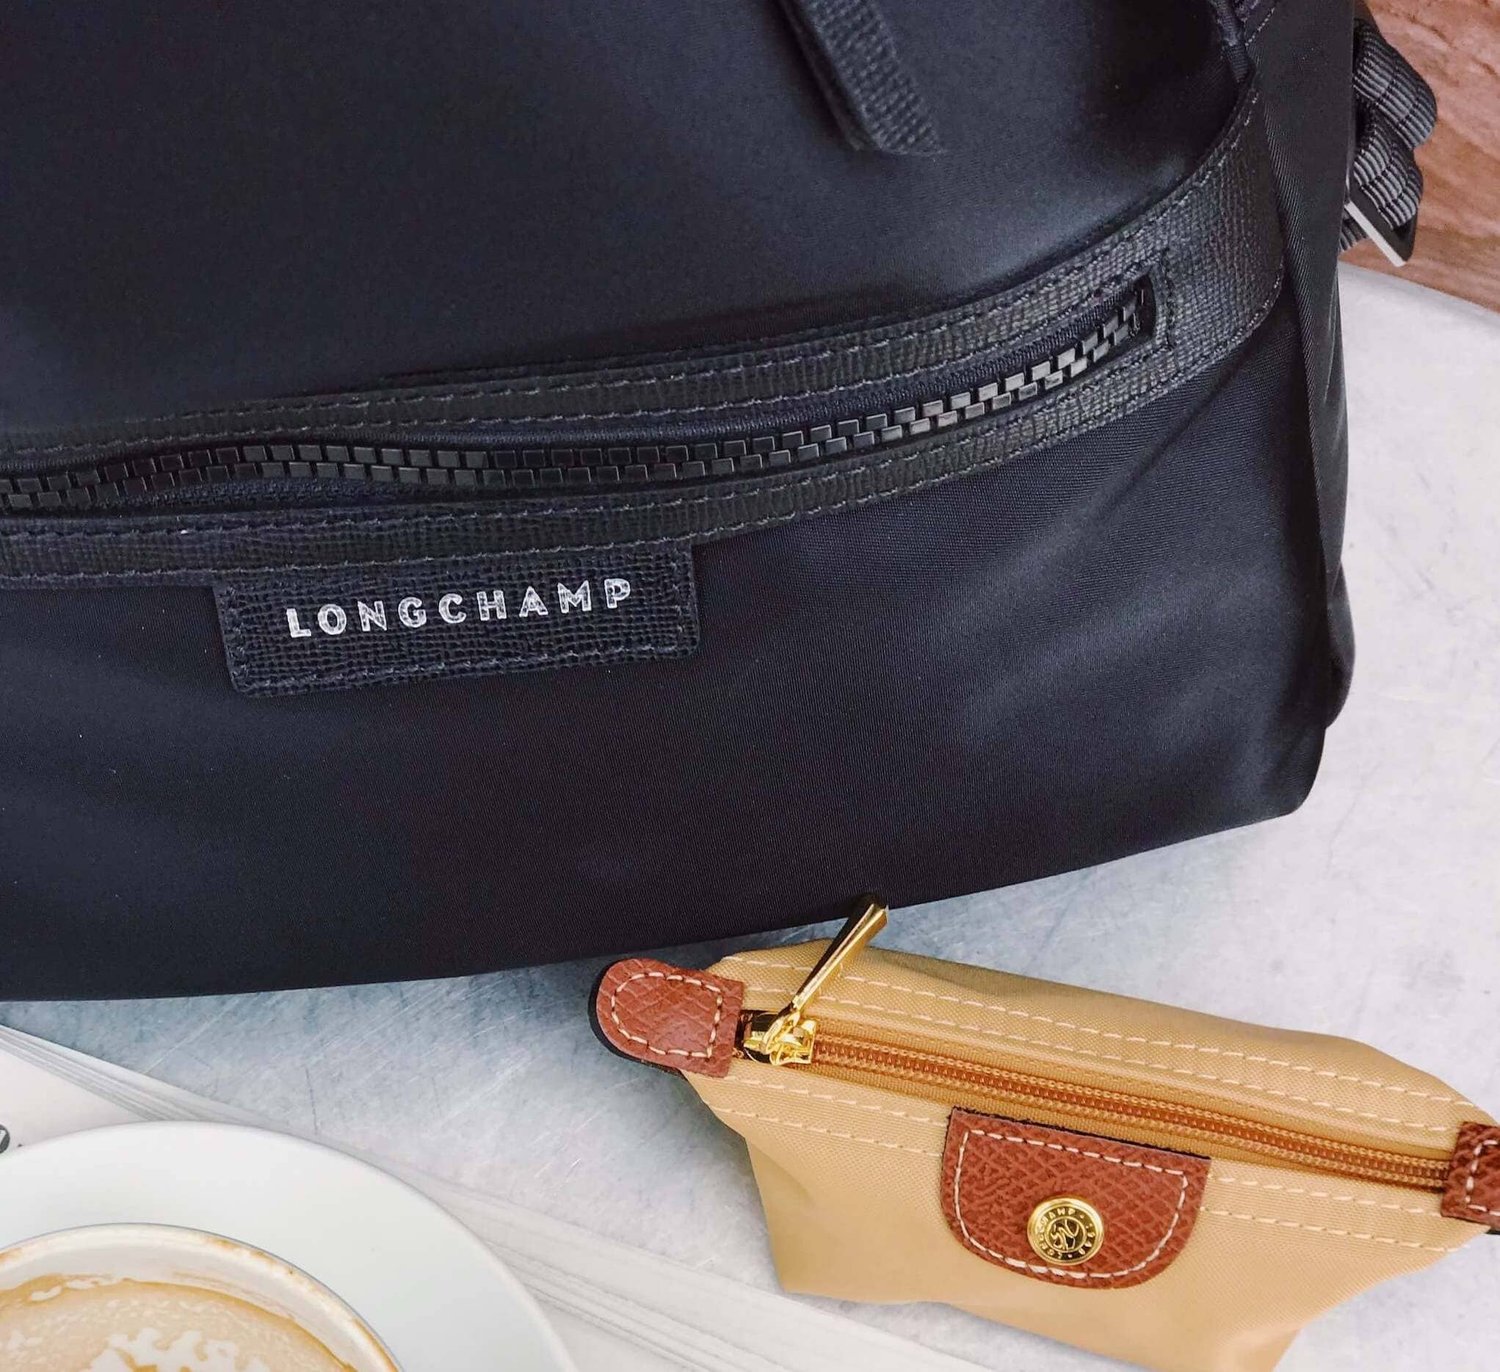 5 Tips To Clean and Care For Your Lambskin Chanel Flap Bag - The Handbag Spa